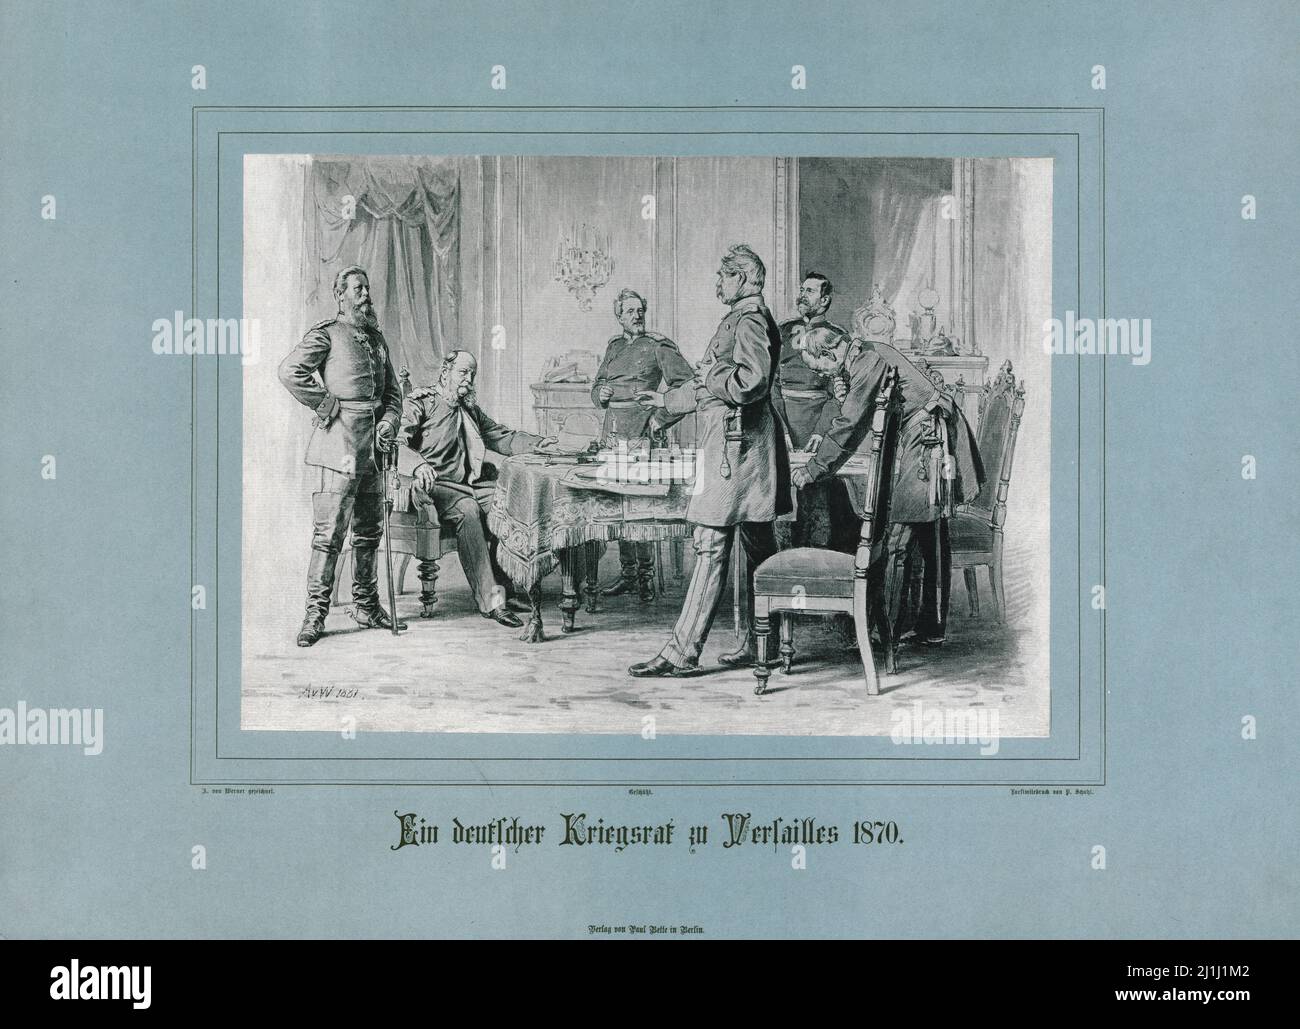 Lithograph of German Emperor William I and the Council of Versailles in 1870. 1881 Stock Photo